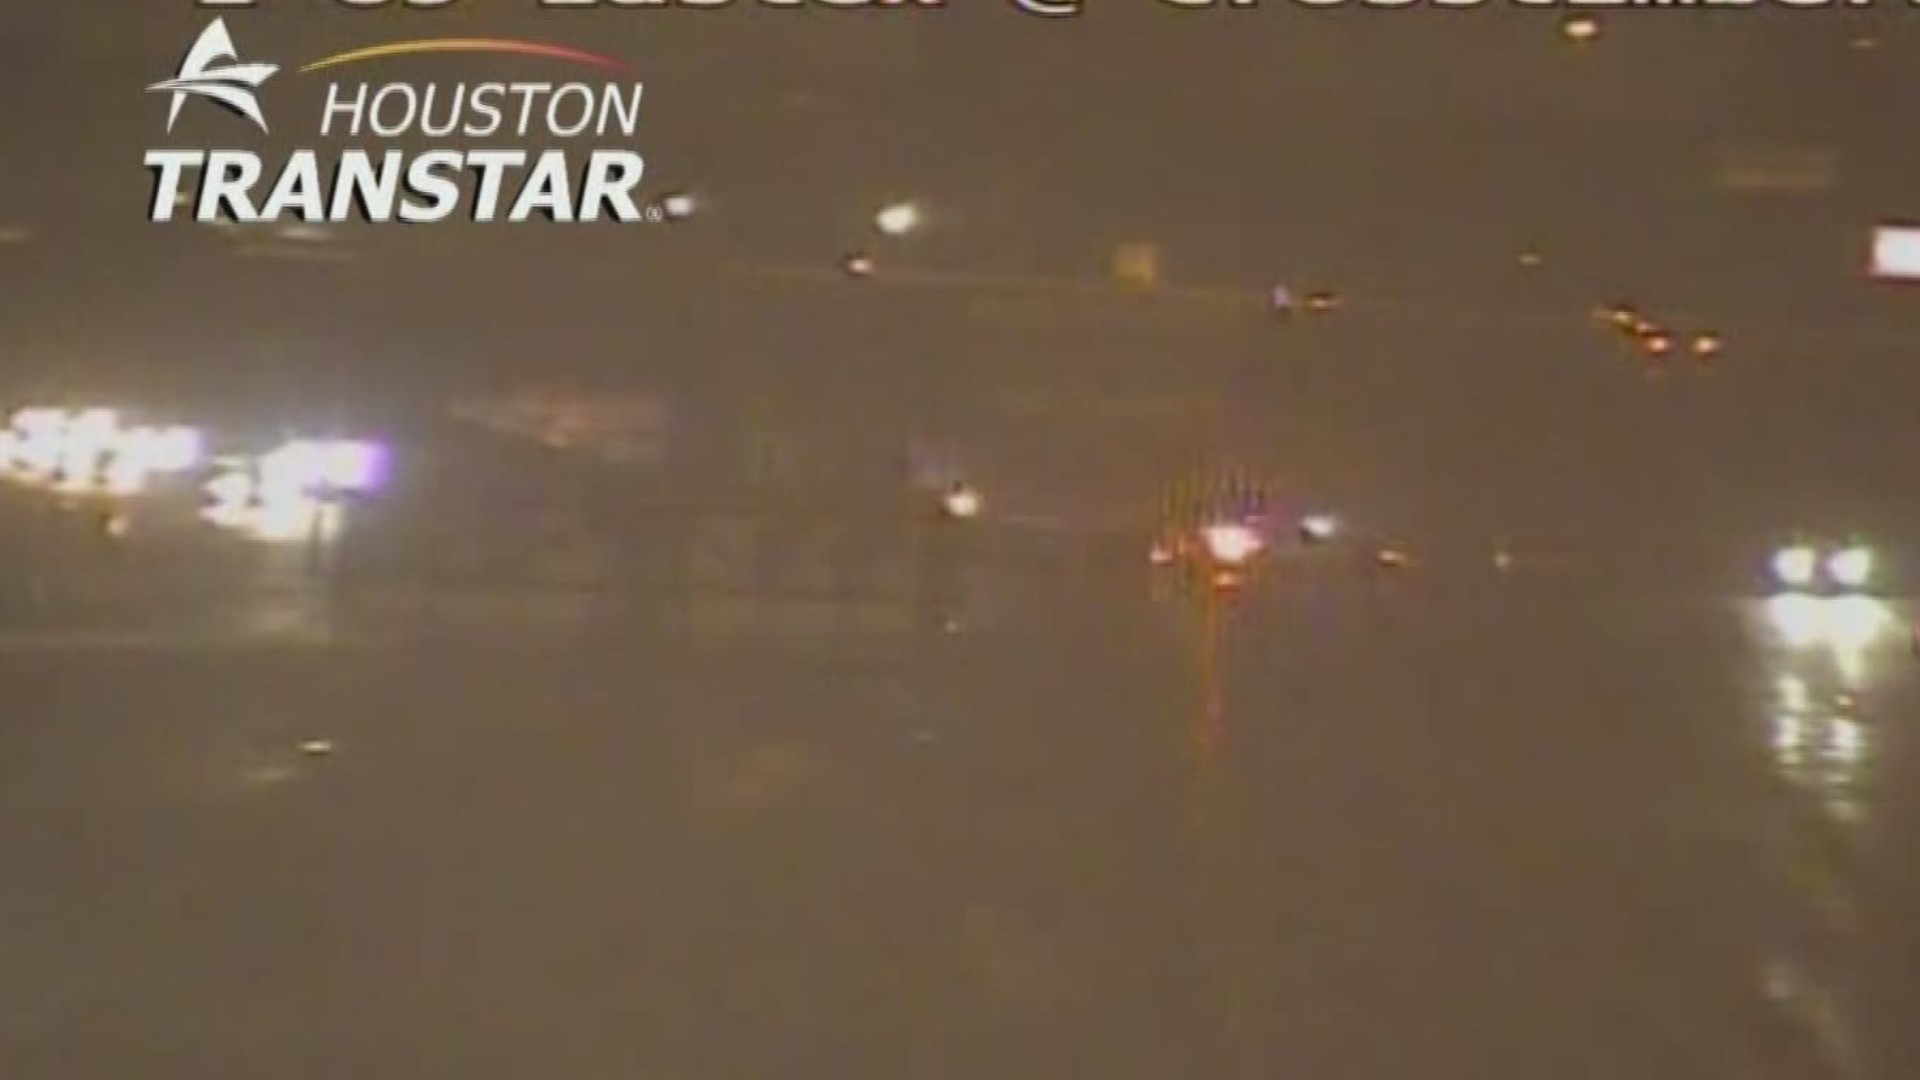 All southbound lanes are blocked at Crosstimbers as of 4:30 a.m. Jan 23, 2020.